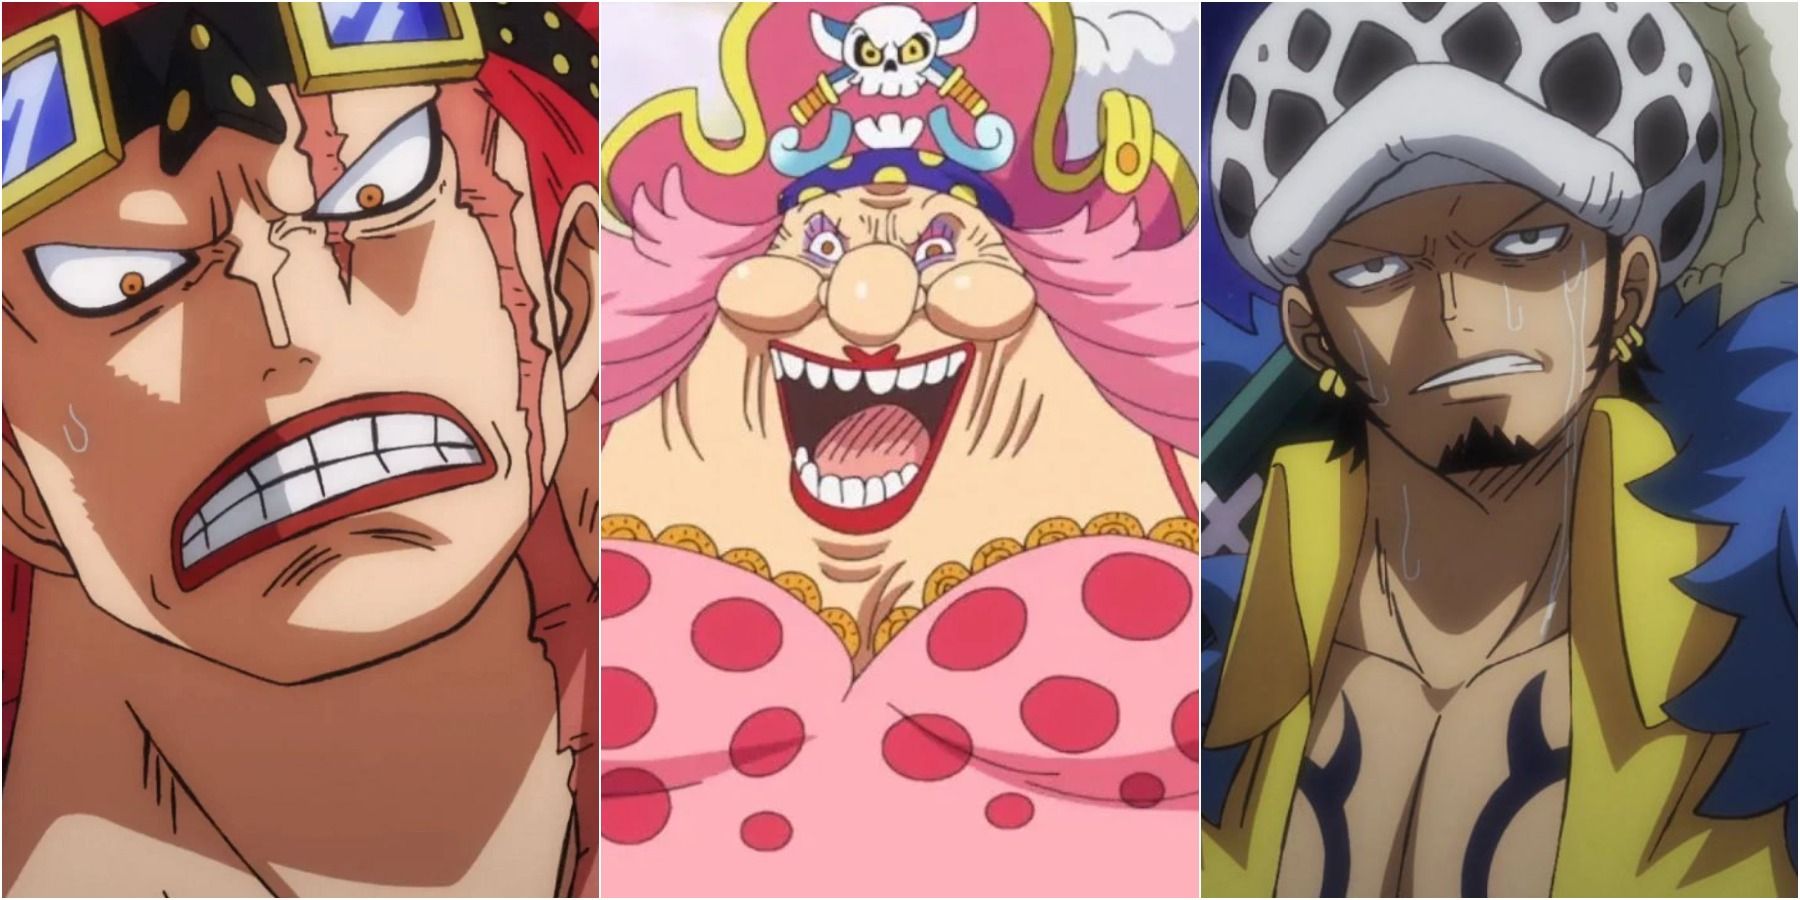 Luffy's Bounty after Wano is going to surpass both Big Mom and